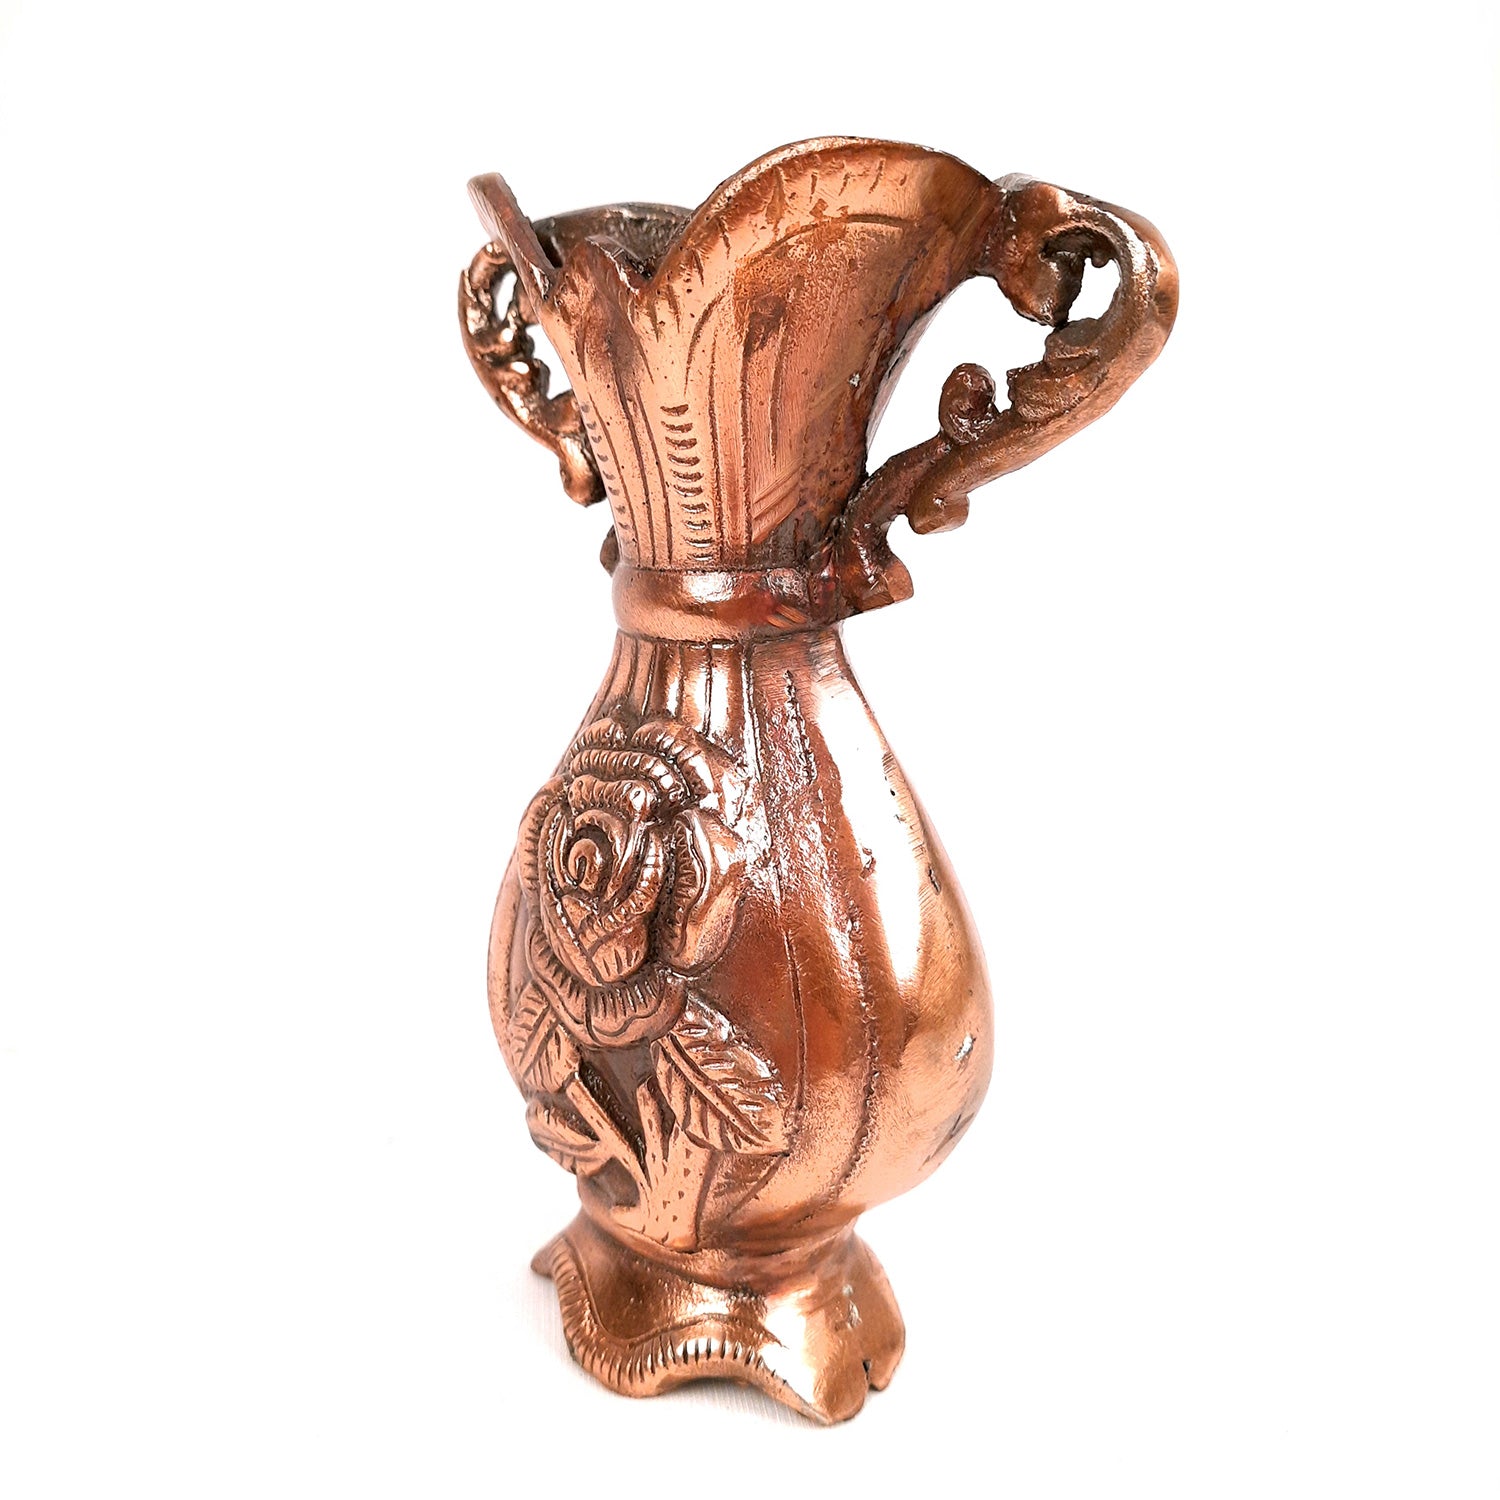 Vase | Flower Pot - Metal | Showpiece Cum Vase - for Home Decoration, Living Room, Table, Shelf, Office , Interior Decor | Gifts for All Occasions - 8 Inches